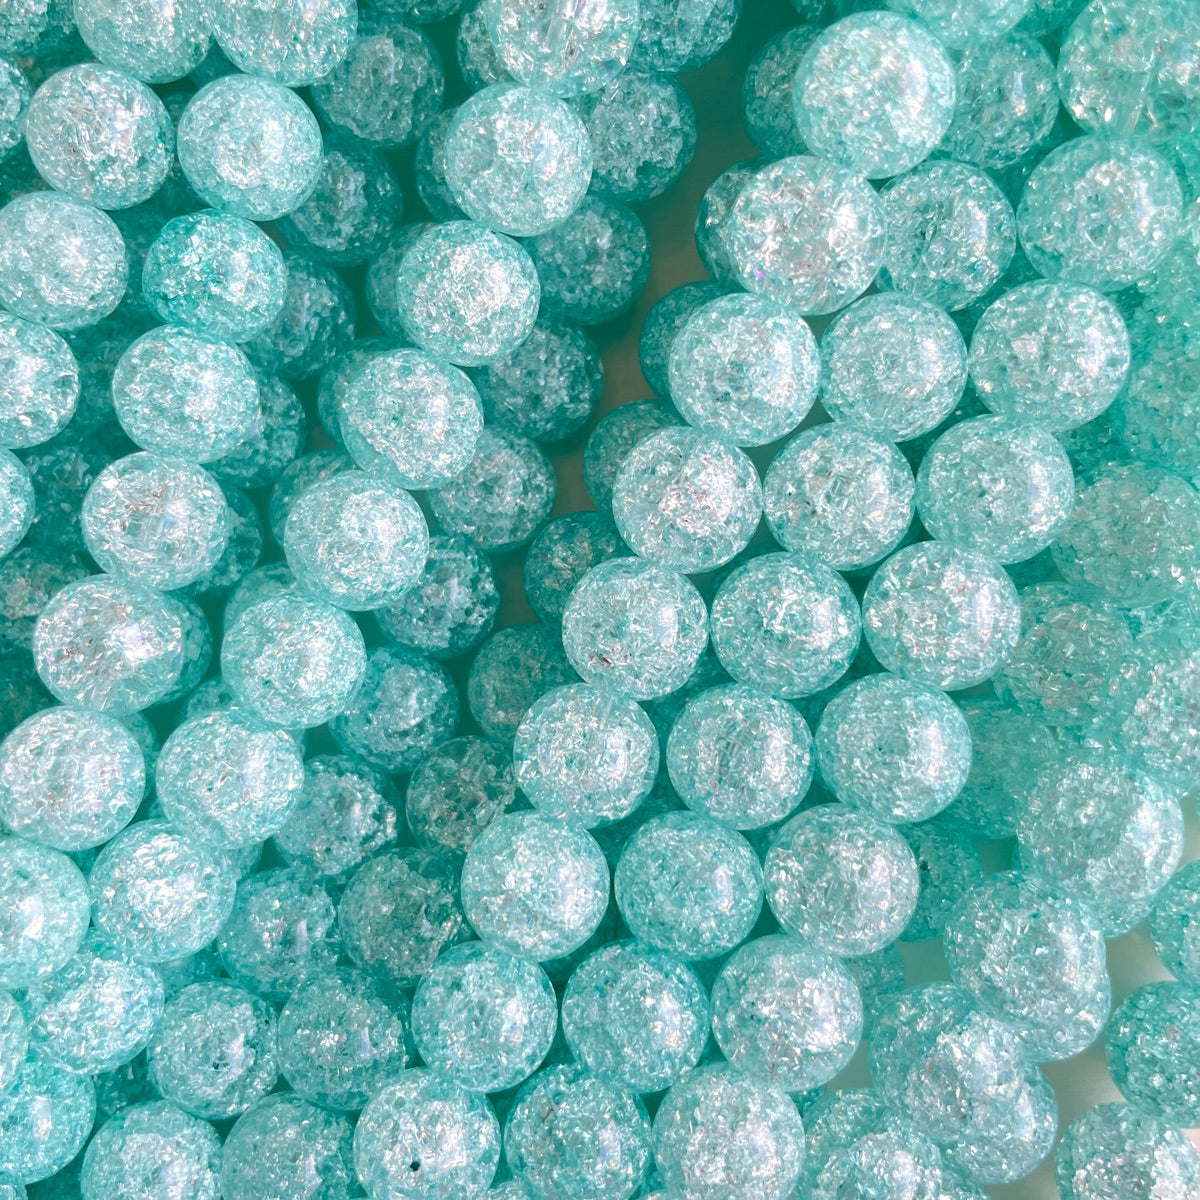 2 Strands/lot 10mm Colorful Popcorn Crystal Round Beads Mint Green Stone Beads New Beads Arrivals Other Stone Beads Charms Beads Beyond